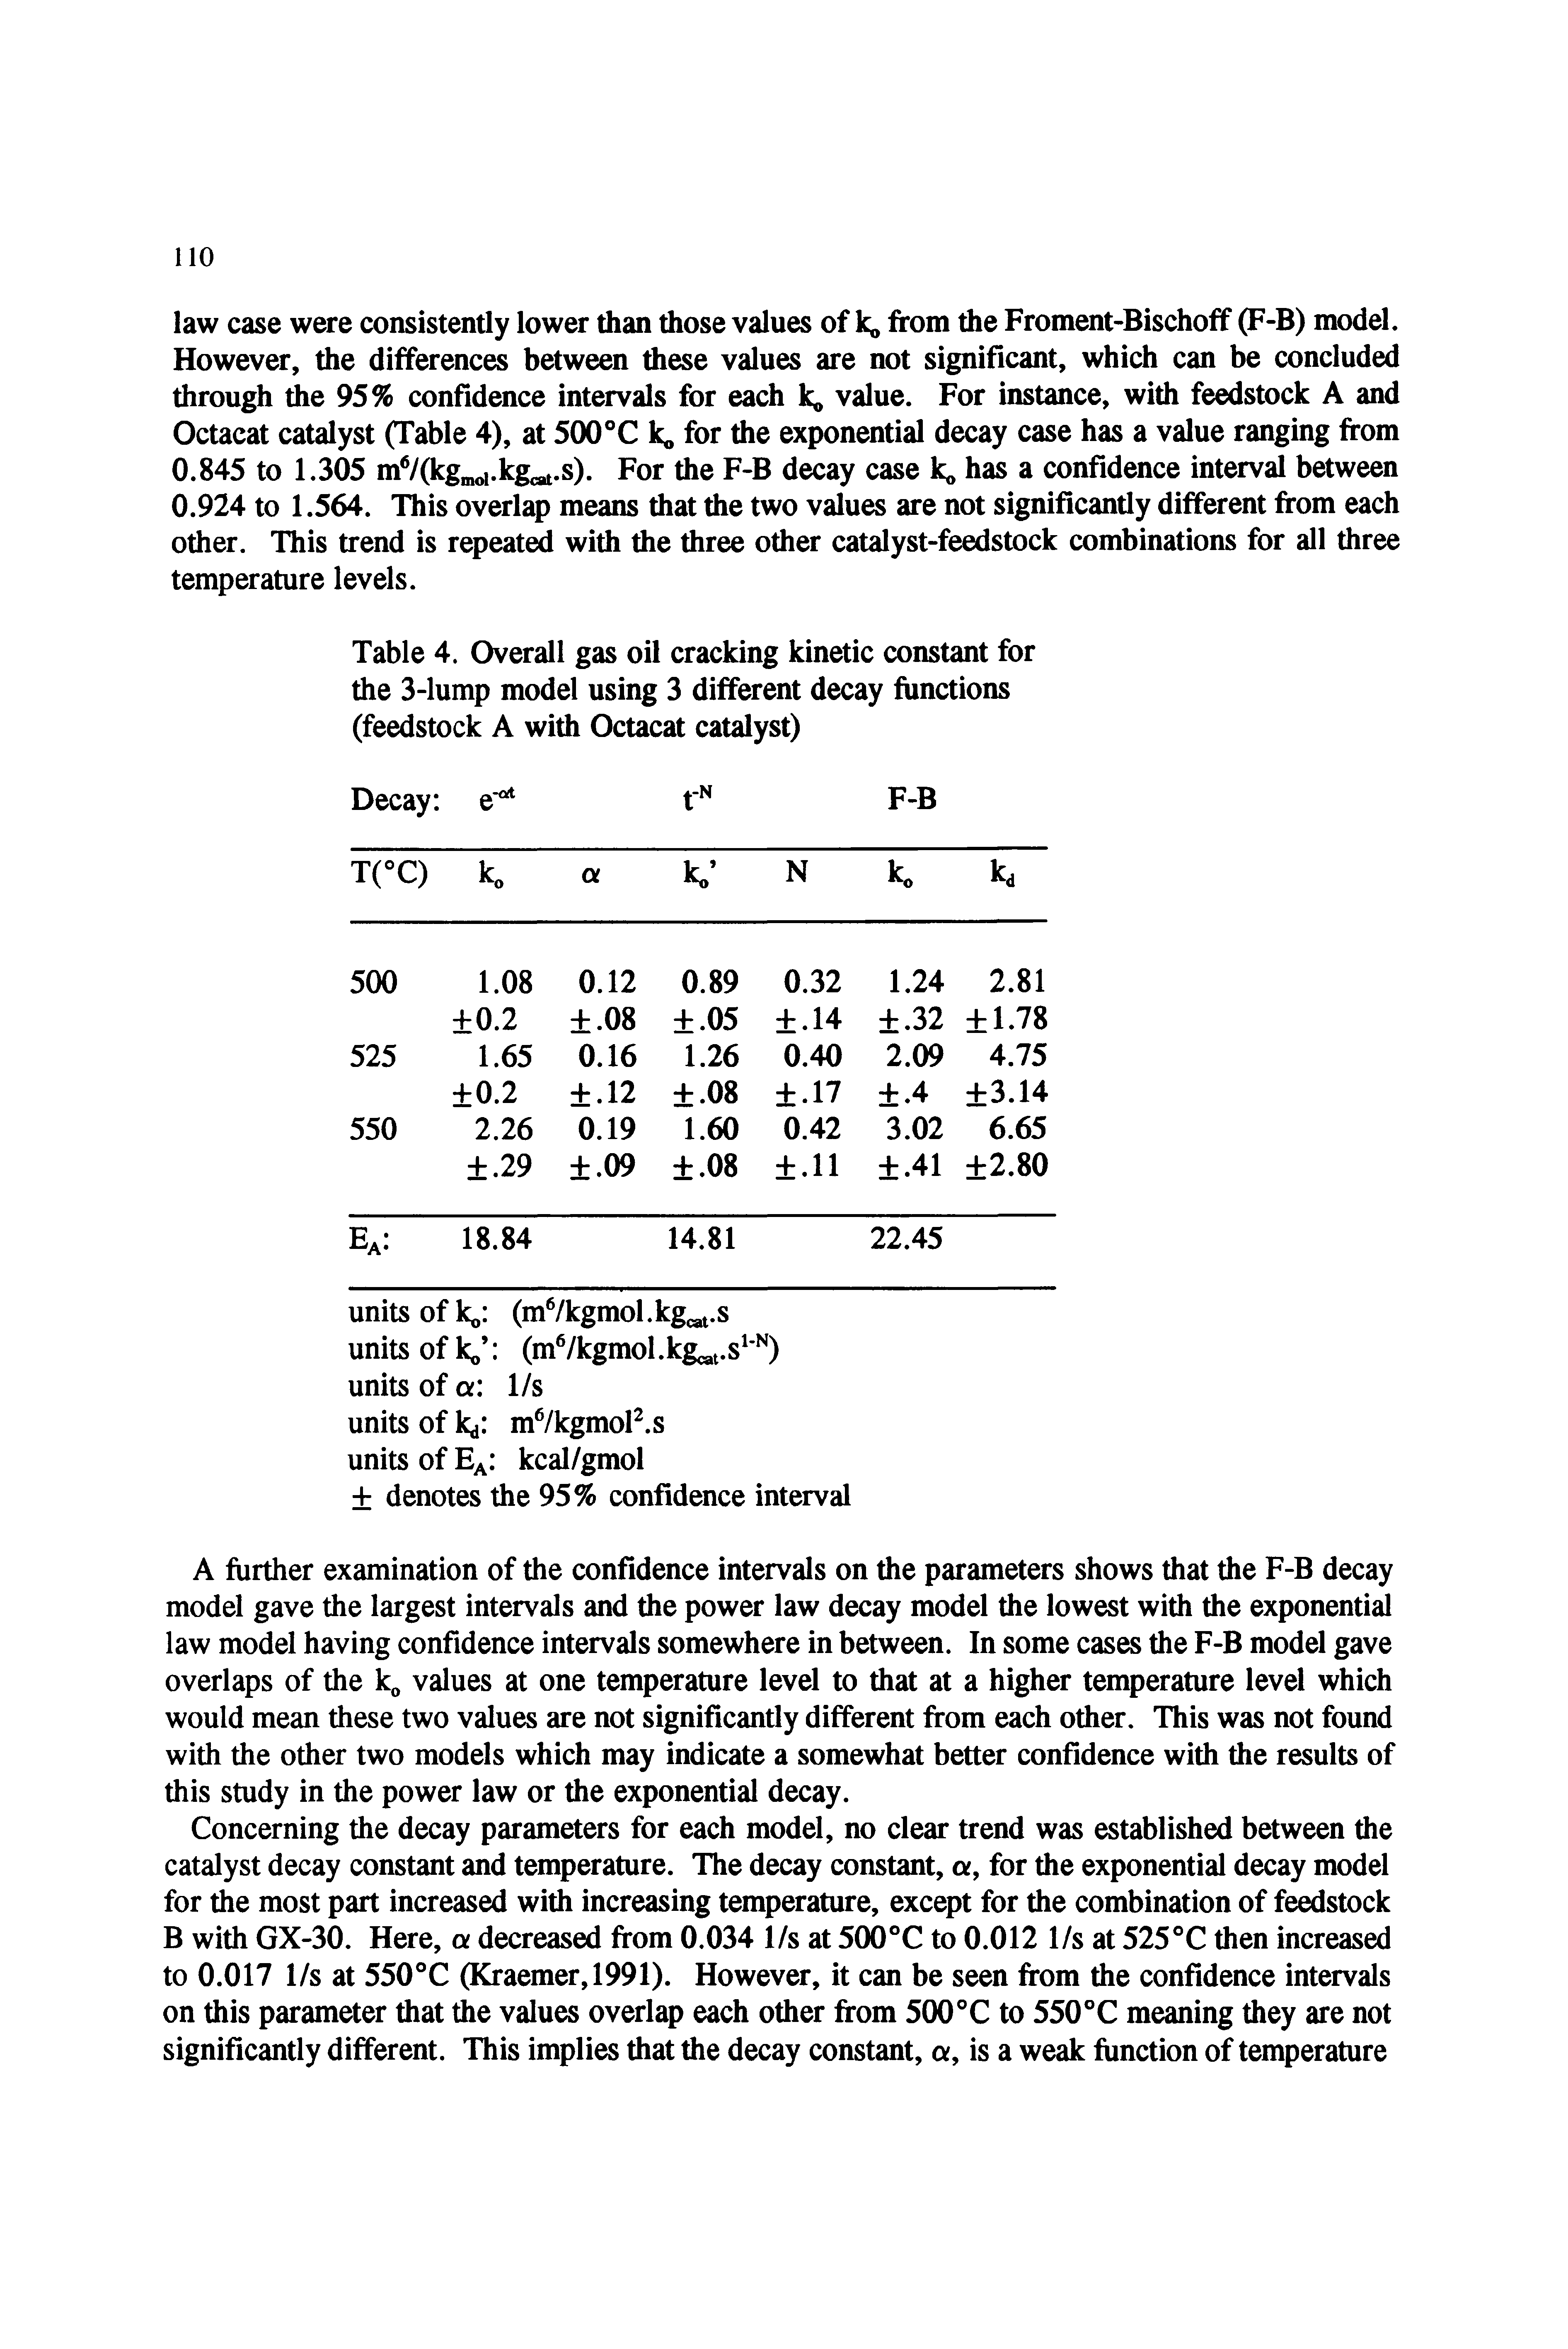 Table 4. Overall gas oil cracking kinetic constant for the 3-lump model using 3 different decay functions (feedstock A with Octacat catalyst)...